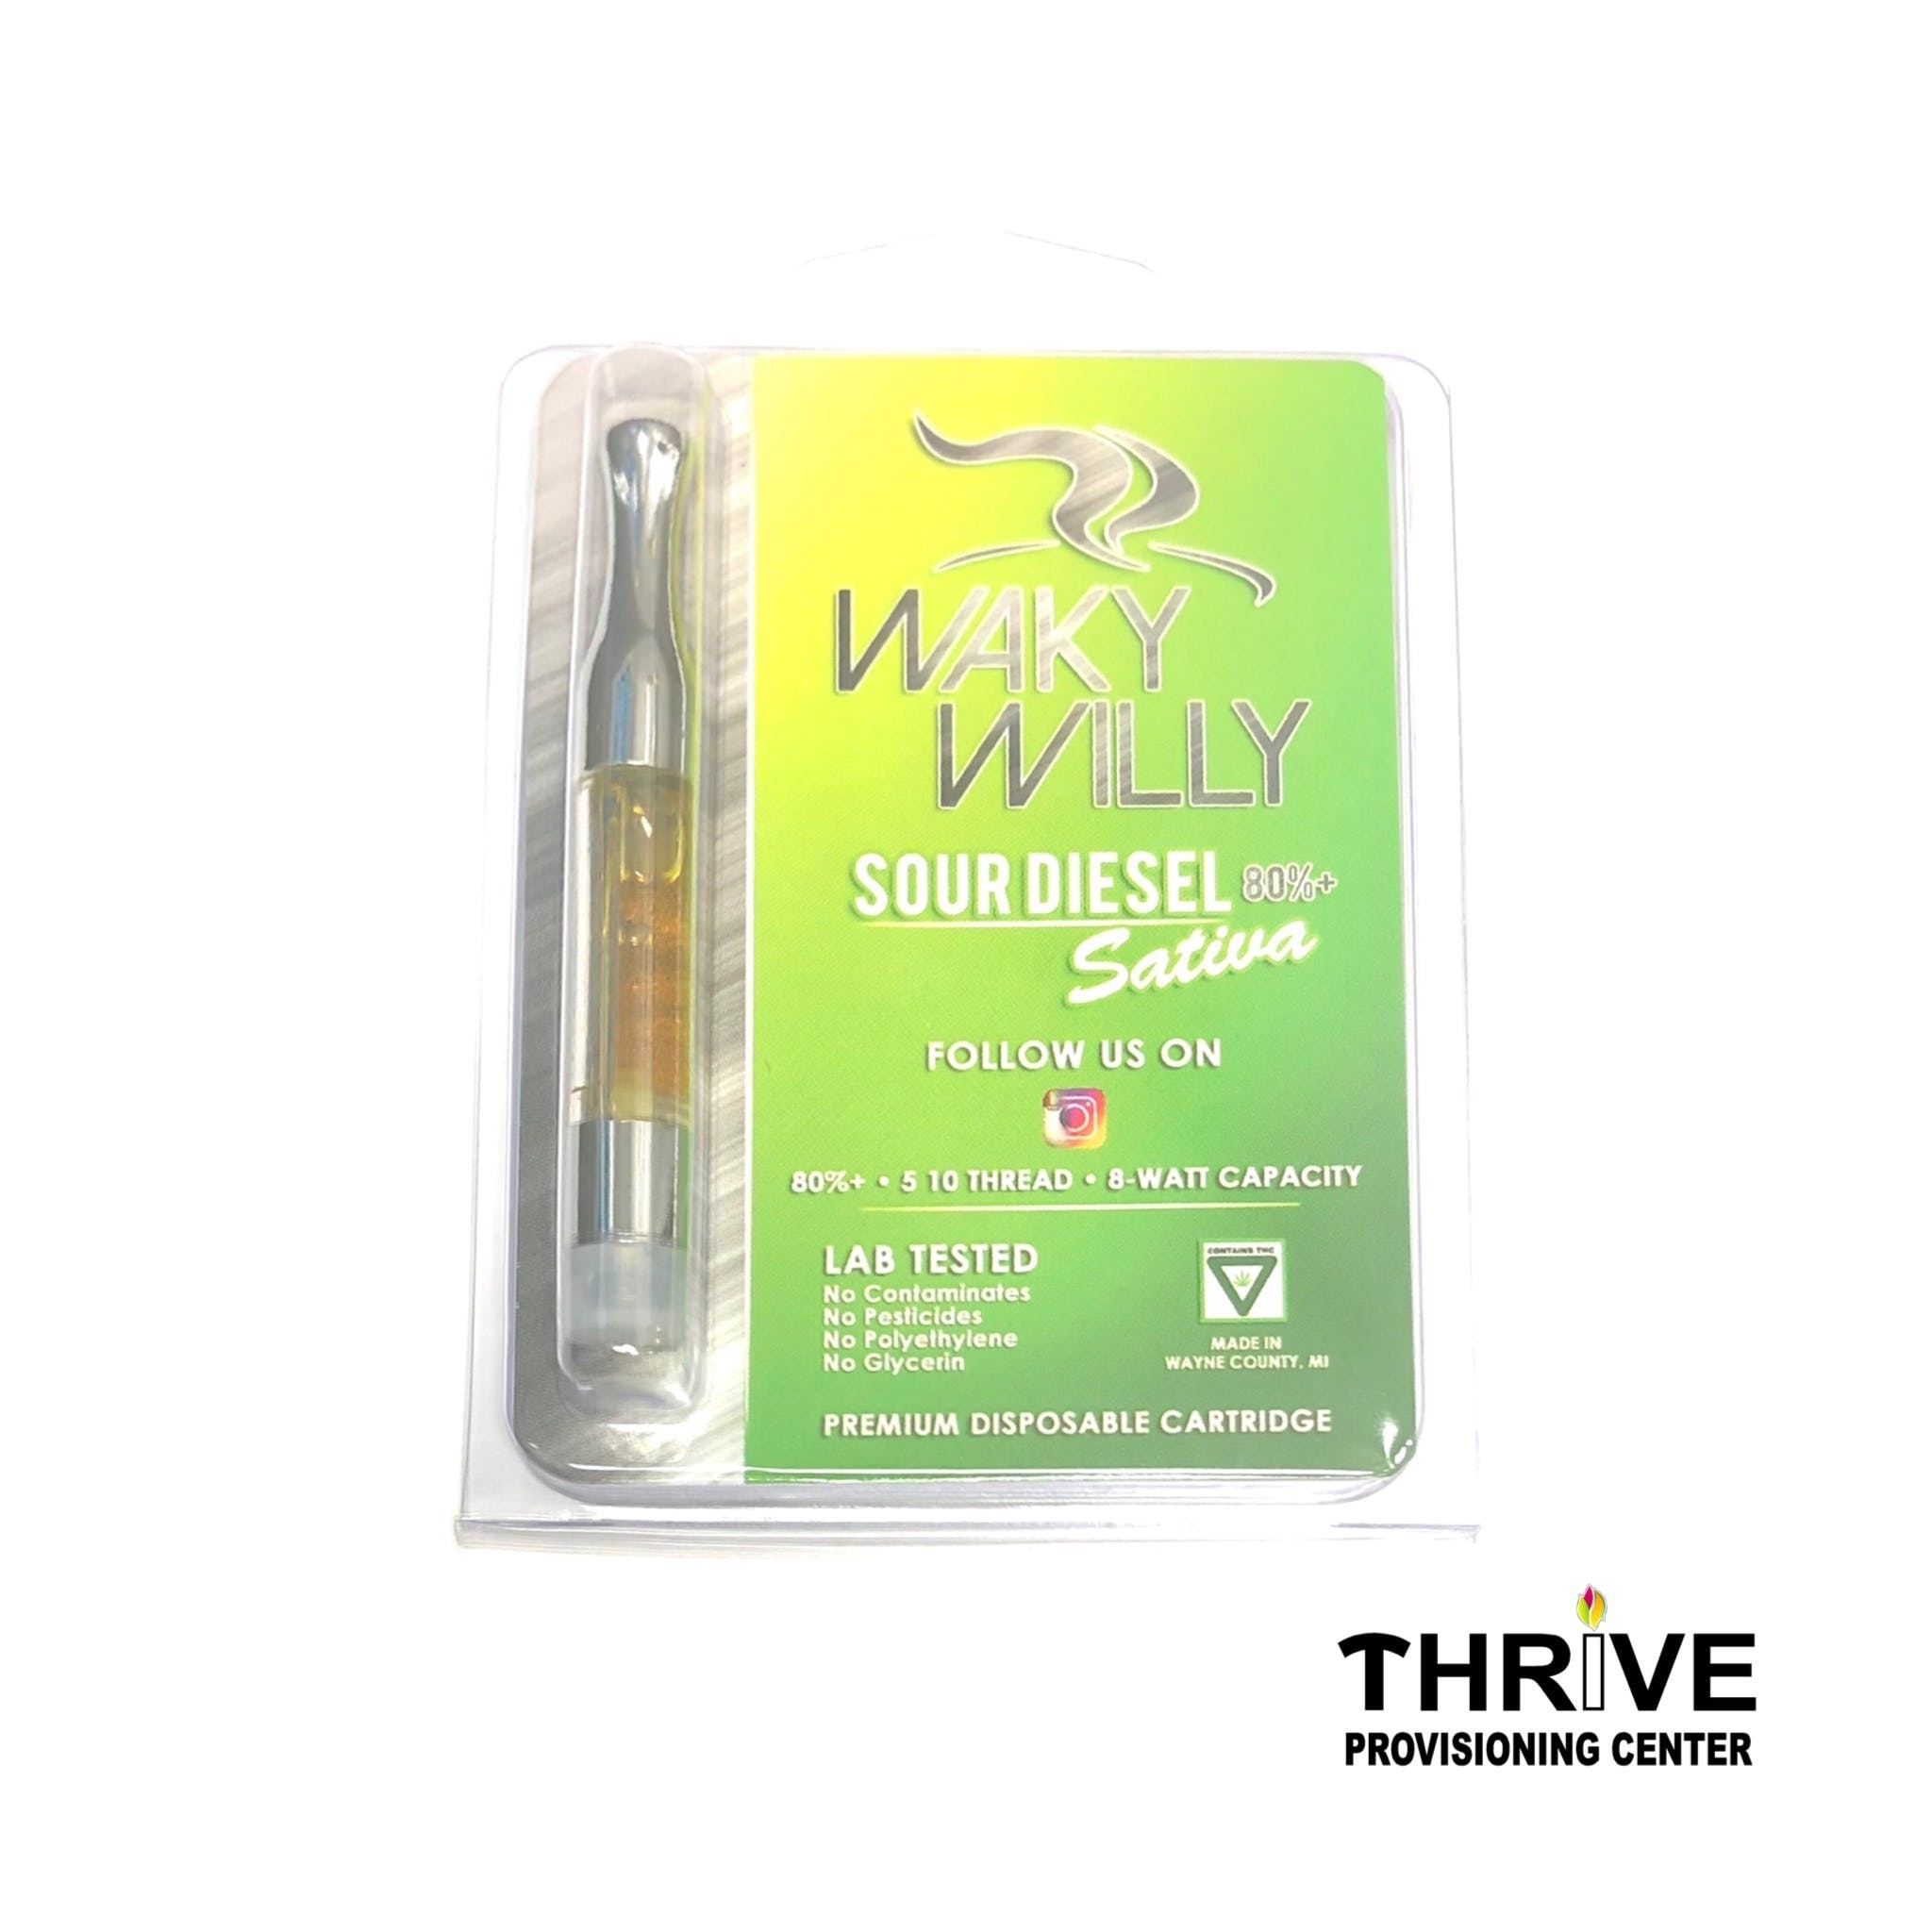 WAKY WILLY CARTRIDGES (80% THC) - 4/$100